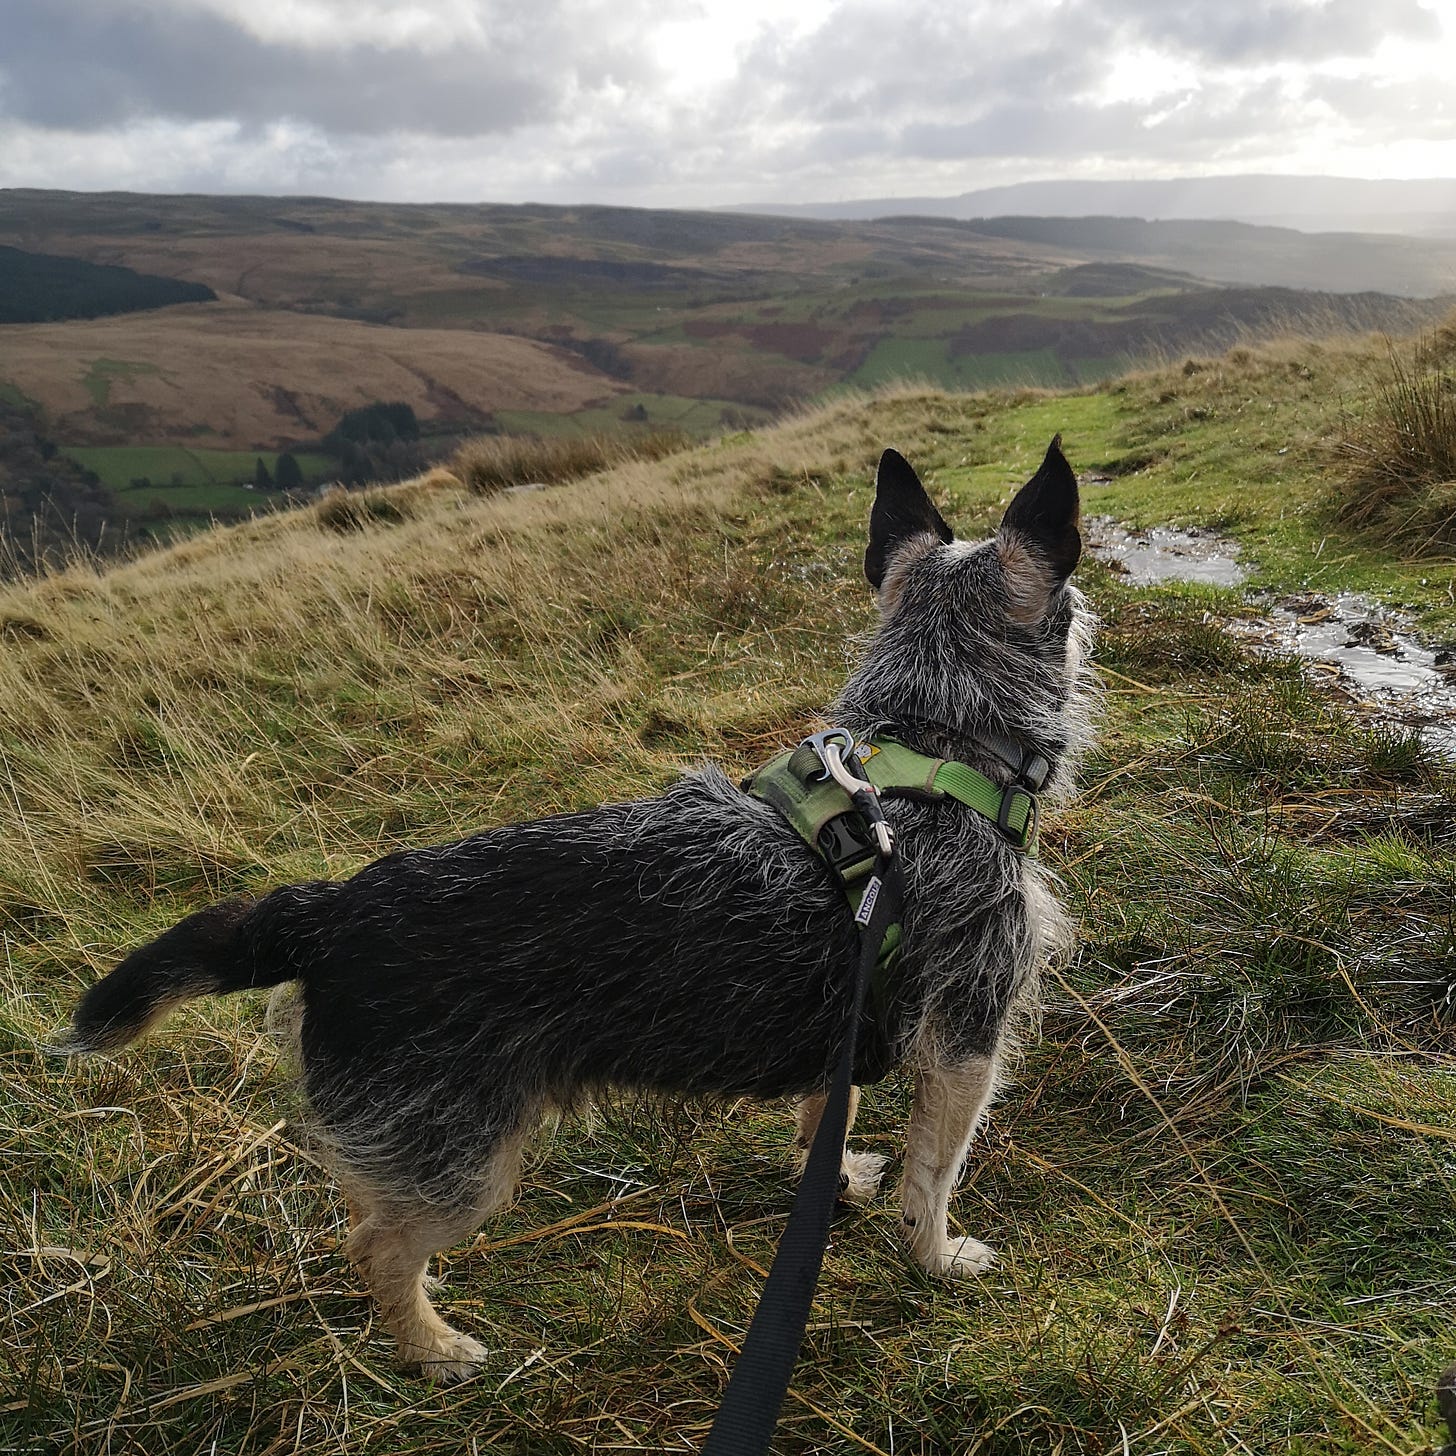 Image description: Jack, a scruffy black and tan terrier stands atop a grassy slope surveyin the valley below. The sky is grey and cloudy.